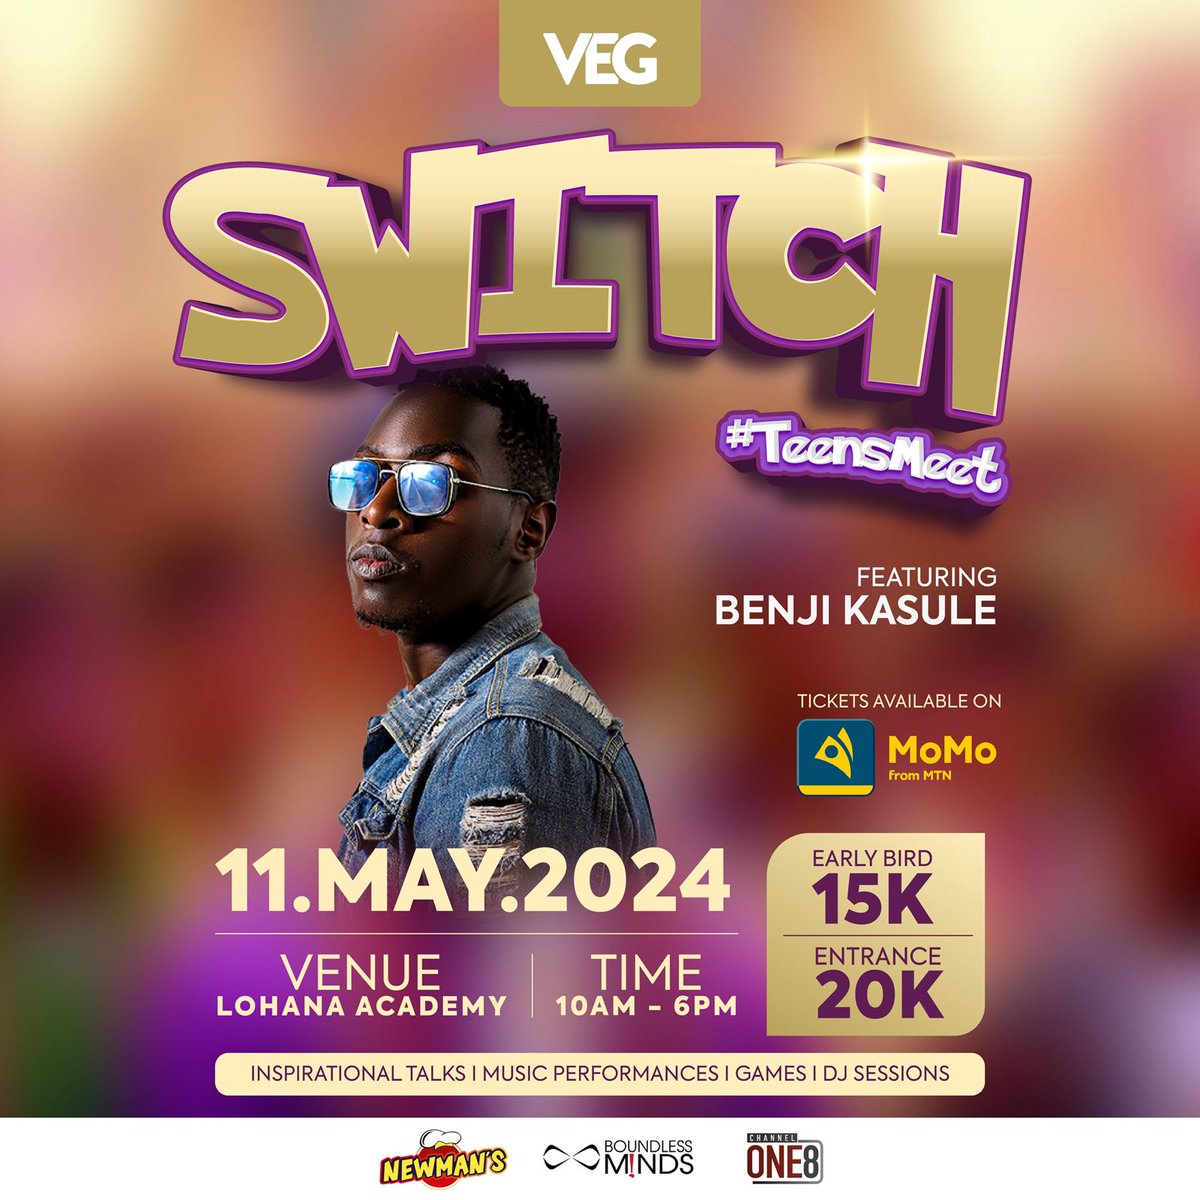 It's a mash-up of fun, learning, and top-notch entertainment! Featuring a gifted vocalist, songster & producer @BenjiKasule live in performance 📆11th May Lohana Academy Kololo 🎟️ Tickets are available at an early-bird price of only 15k via @mtnmomoug #Switch2024 #TeensMeet